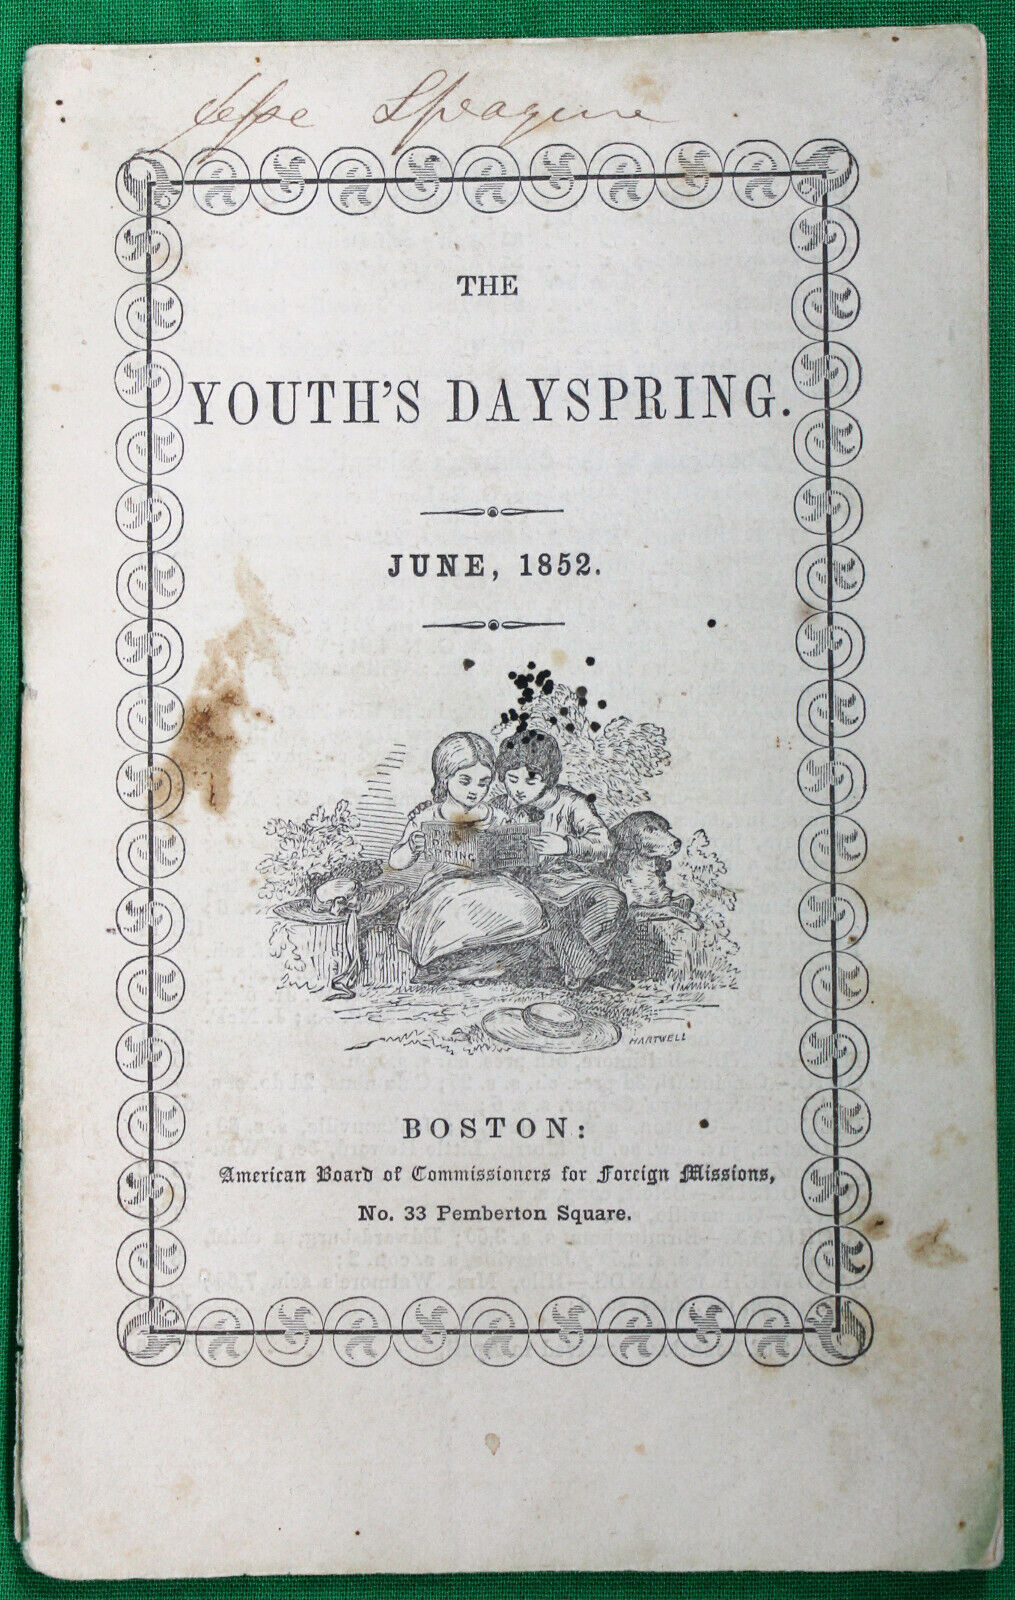 Original June 1852 The Youth’s Dayspring Chapbook